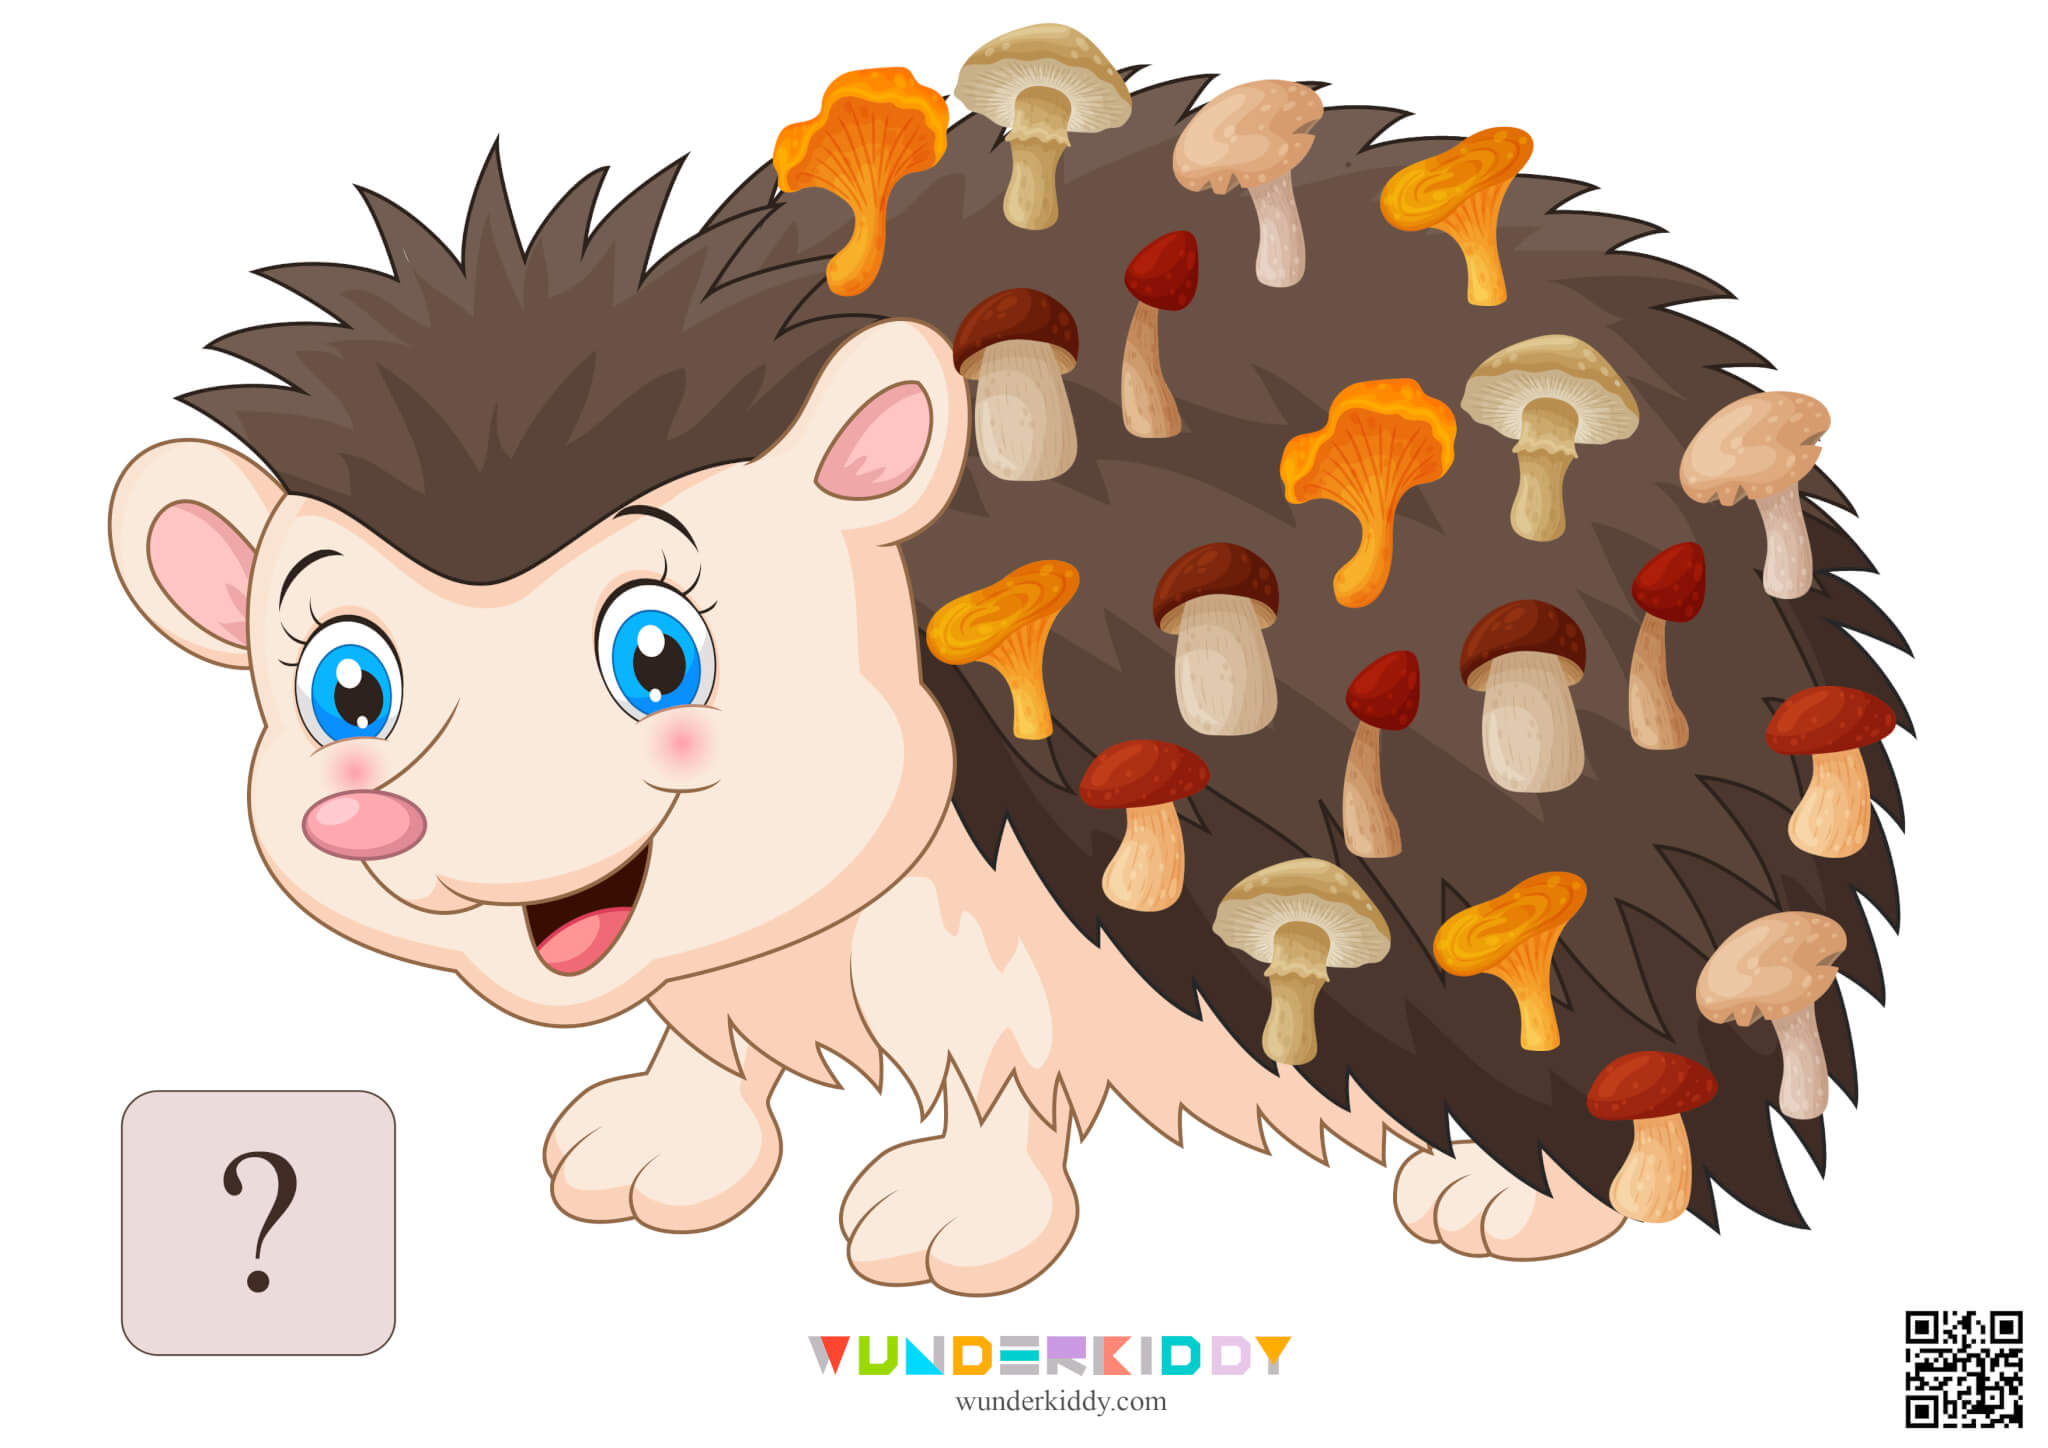 Worksheet Count to 20 with Hedgehog and Mushrooms - Image 24